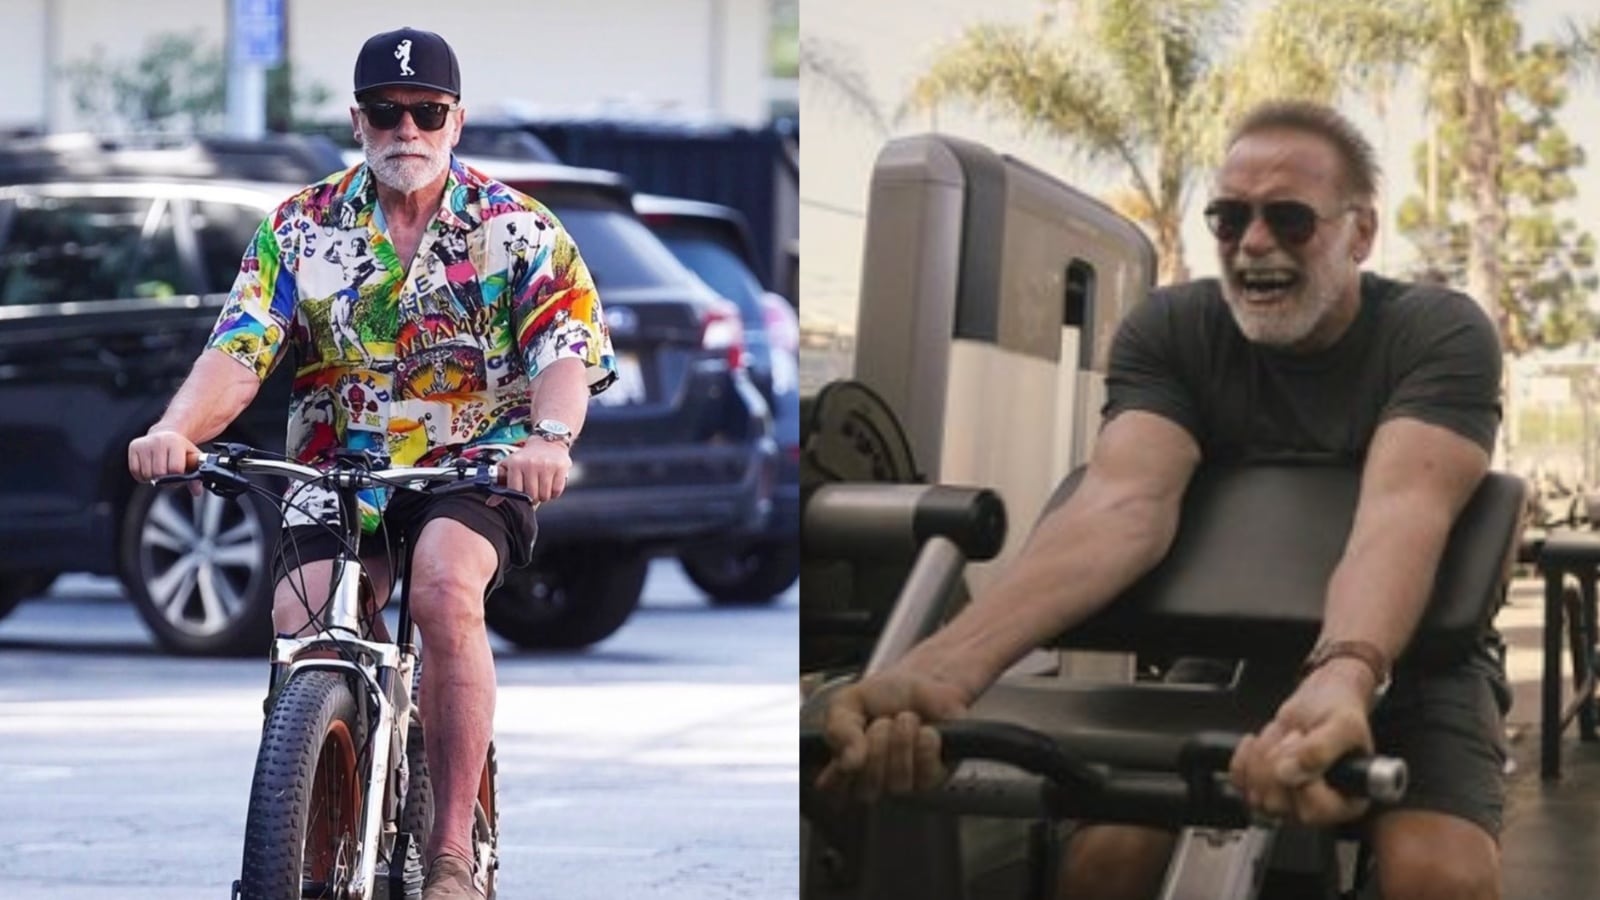 Arnold Schwarzenegger Reflects on Changing Physique at Age 76